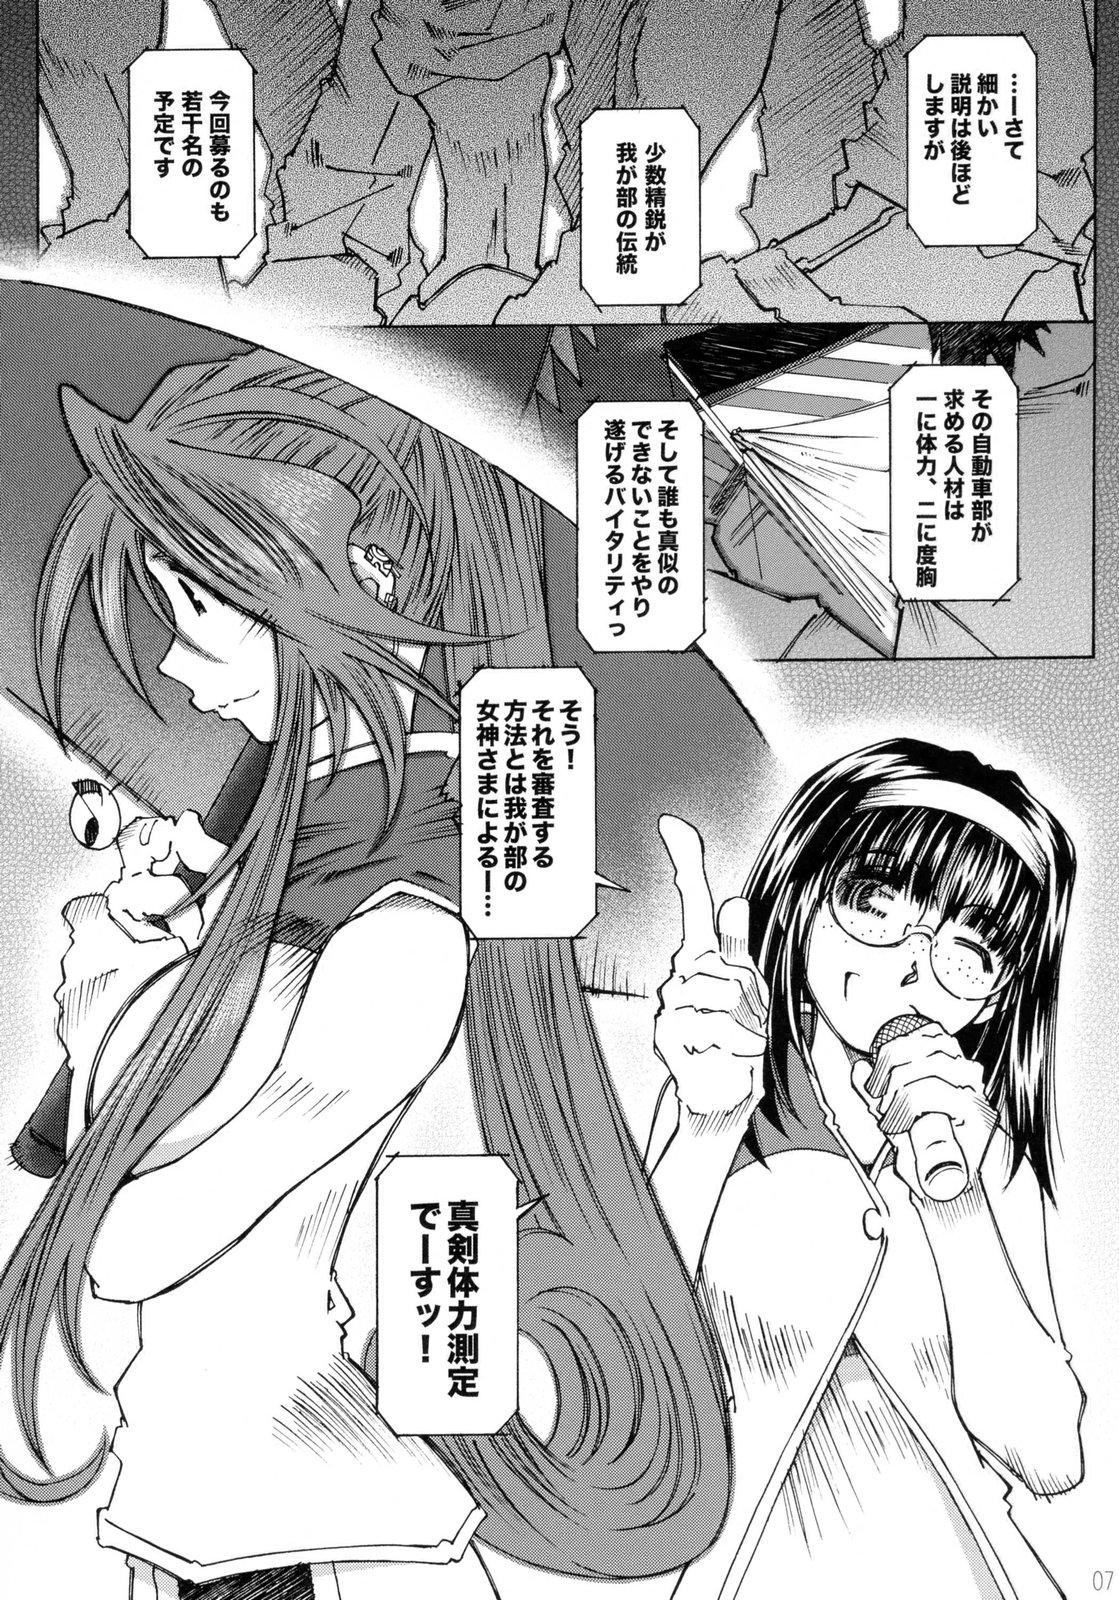 Affair SILENT BELL outbreak - Ah my goddess Barely 18 Porn - Page 7